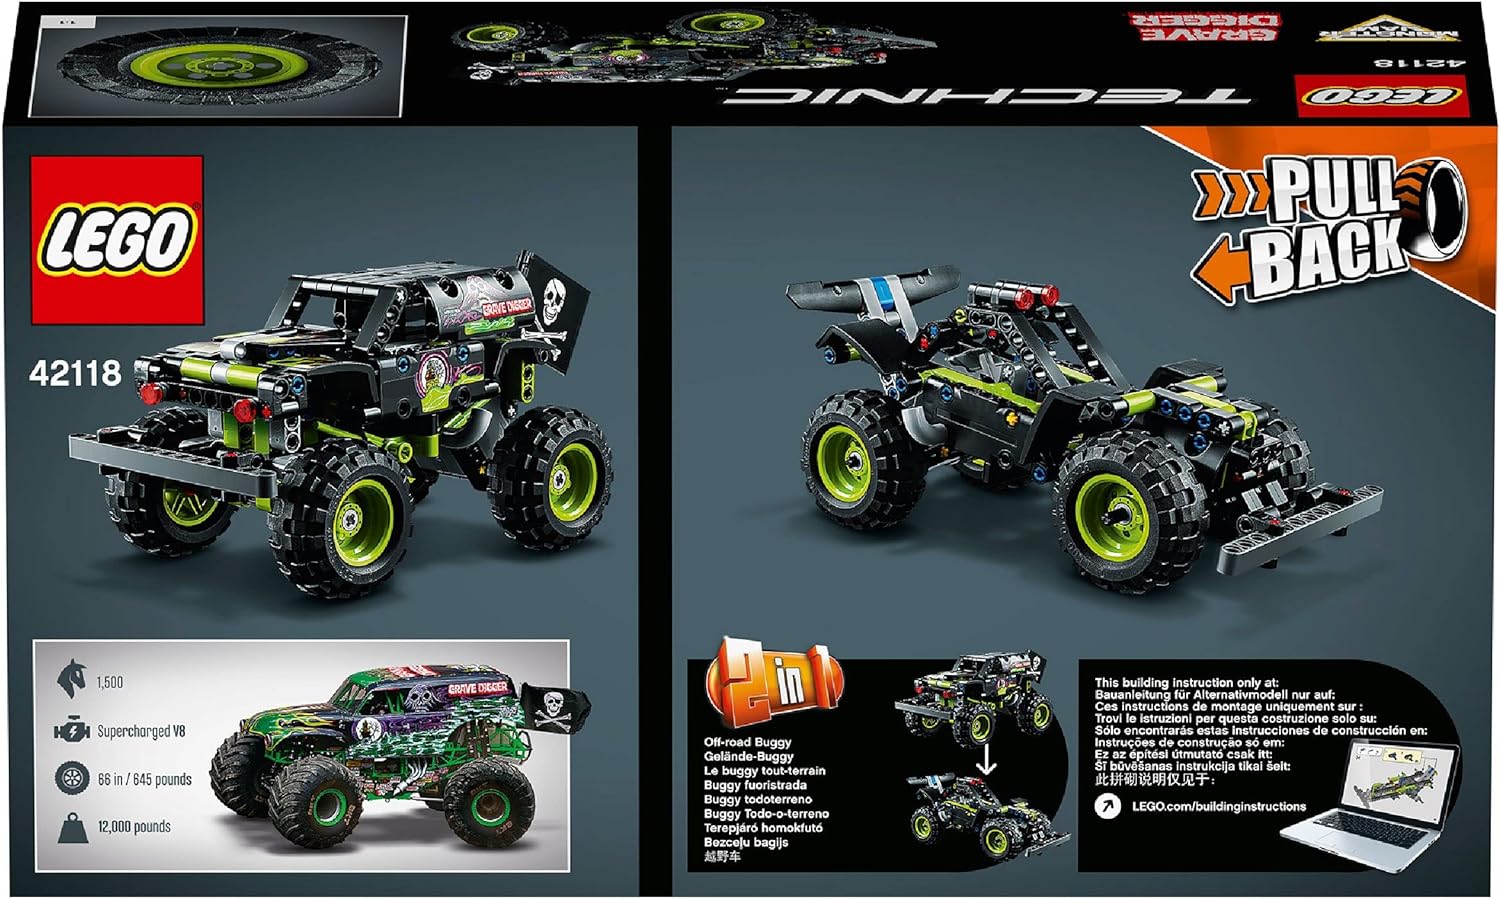 LEGO 42118 Technic Monster Jam Grave Digger Truck Toy or Off-Road Buggy, 2-in-1 Construction Kit